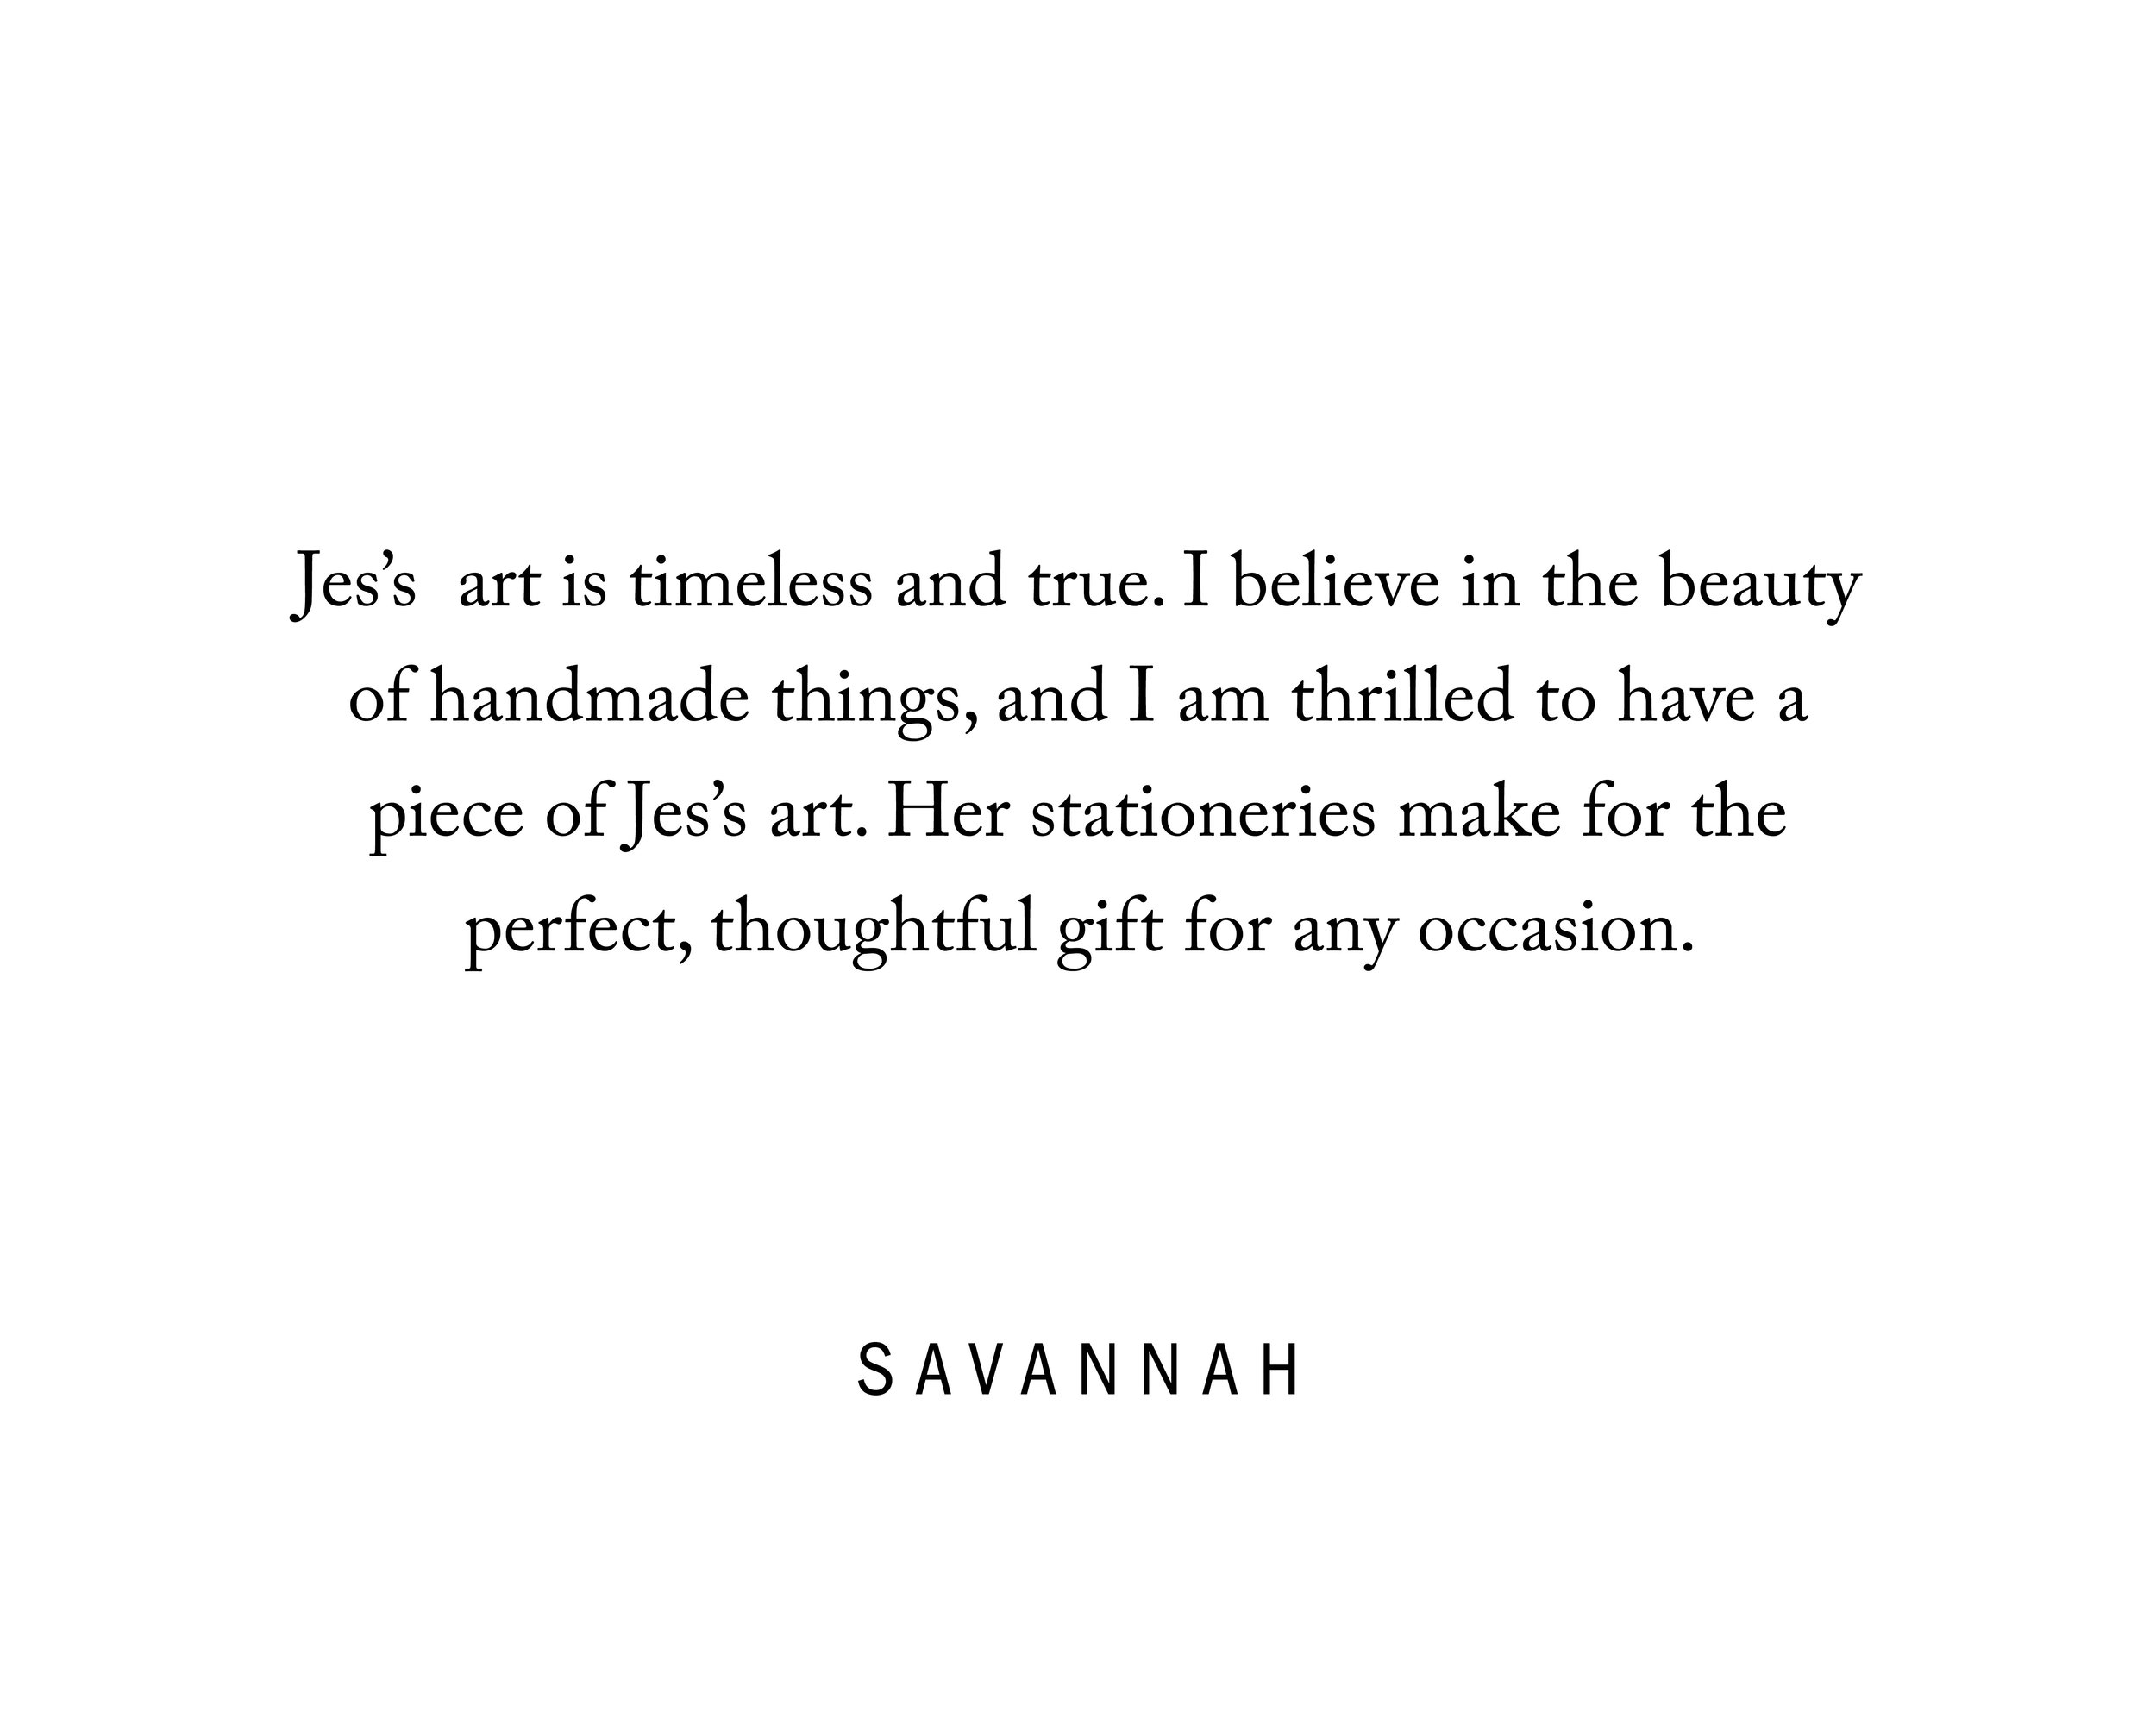  Jes’s art is timeless and true. I believe in the beauty of handmade things, and I am thrilled to have a piece of Jes’s art. Her stationeries make for the perfect, thoughtful gift for any occasion. 